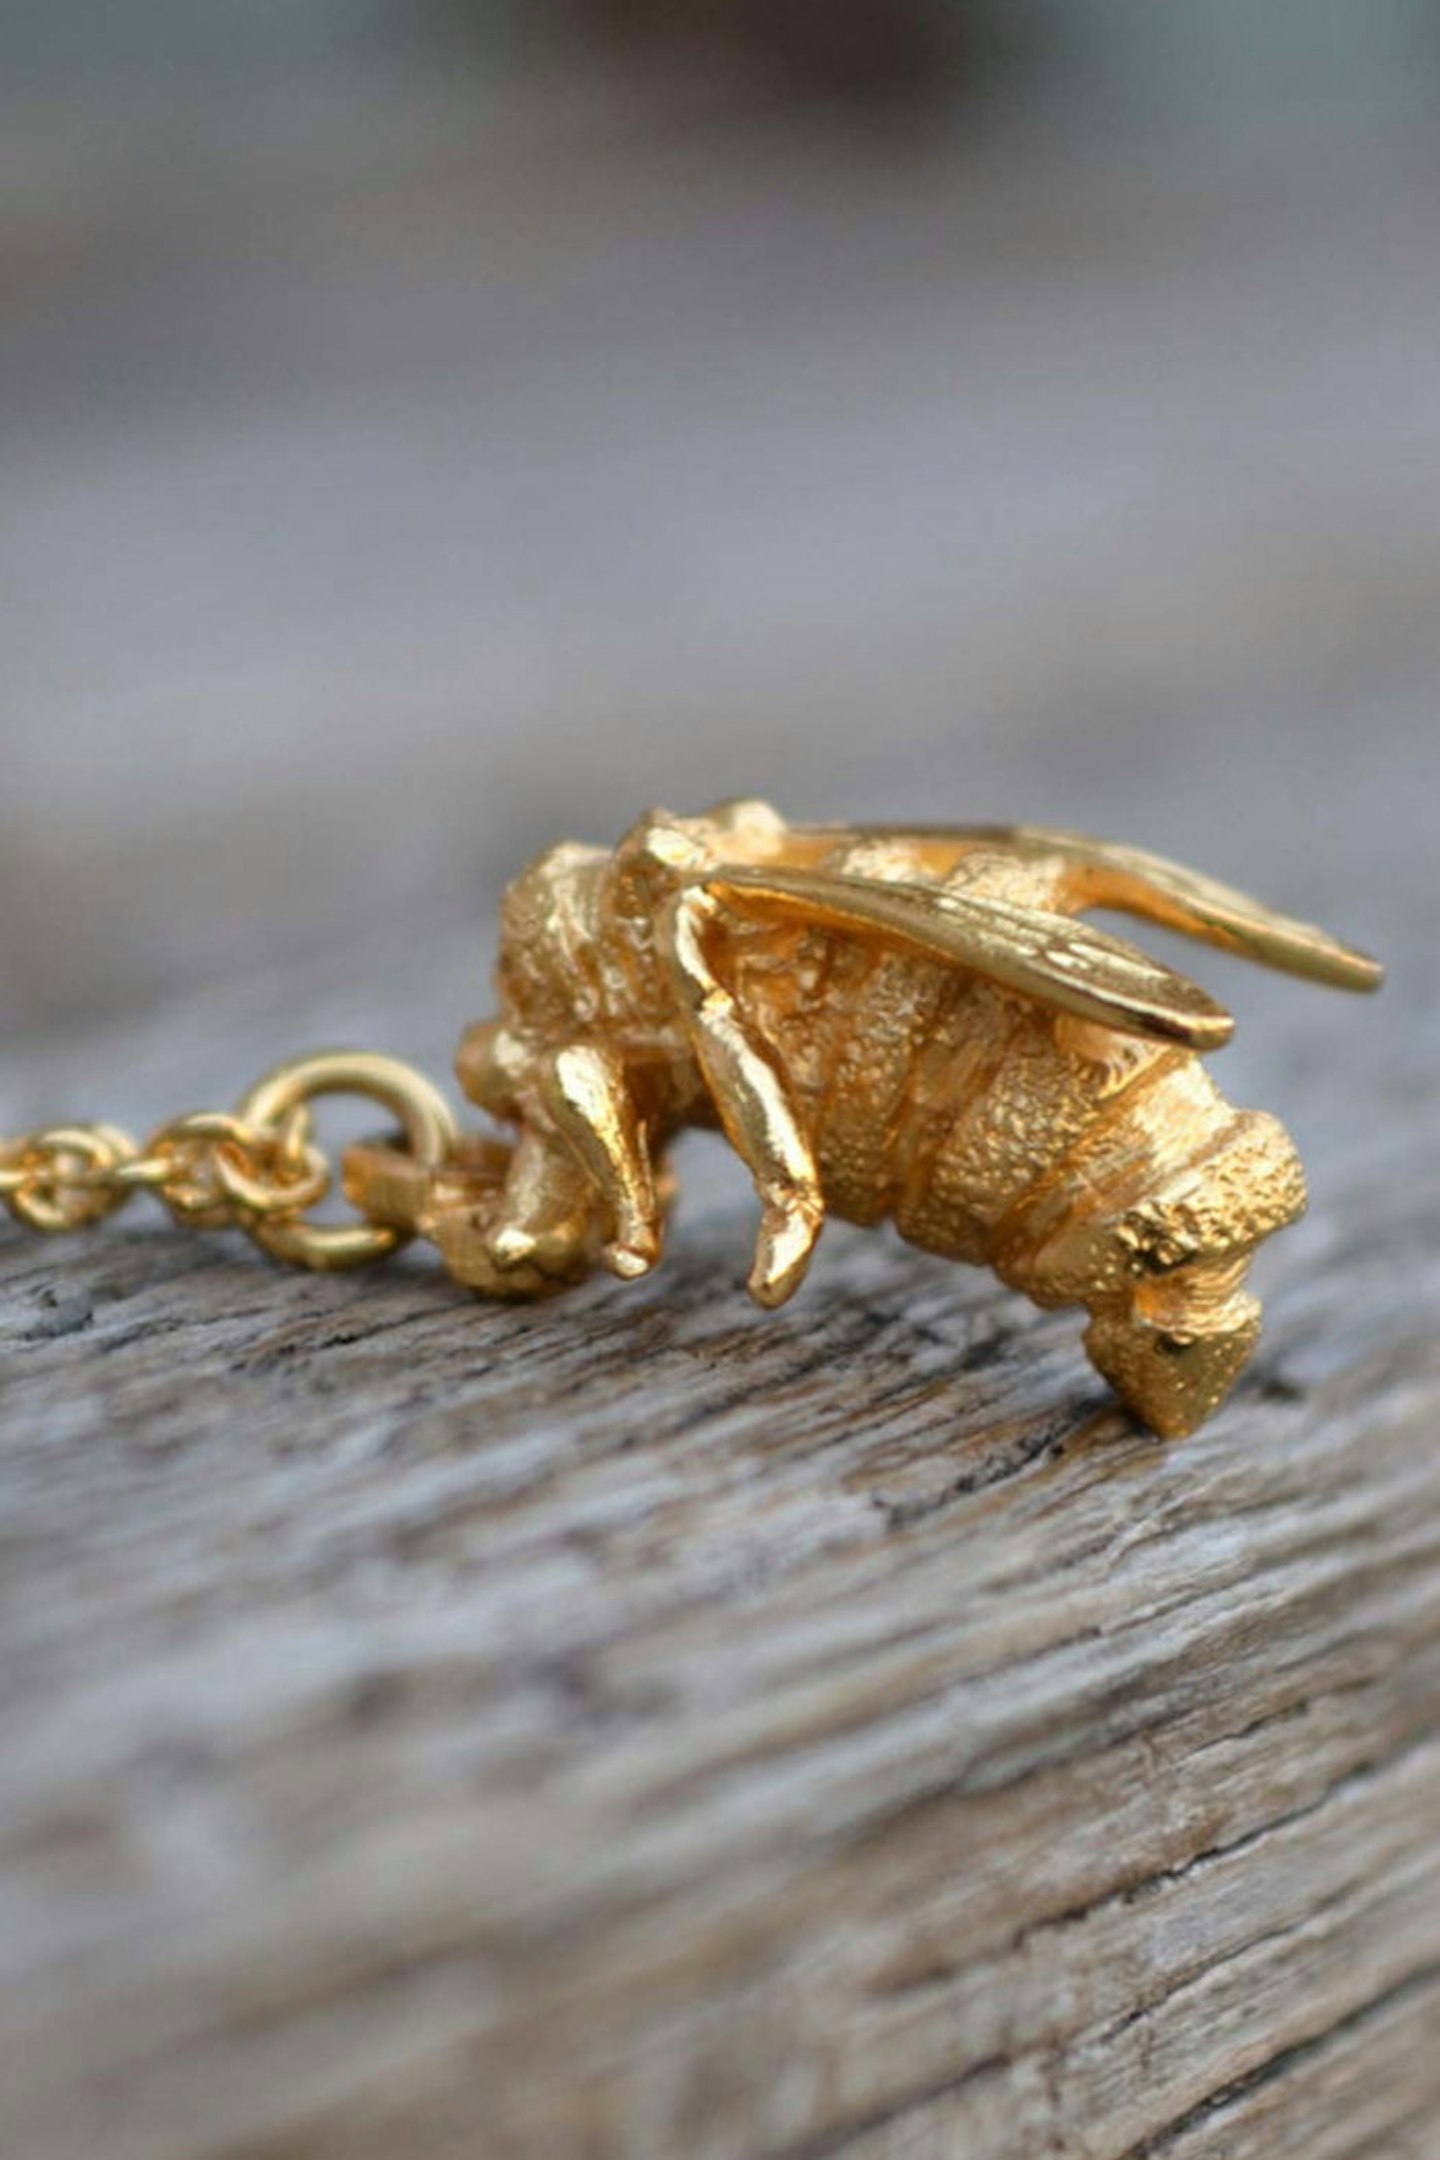 3. Bill Skinner Bee Pendant Gold Necklace